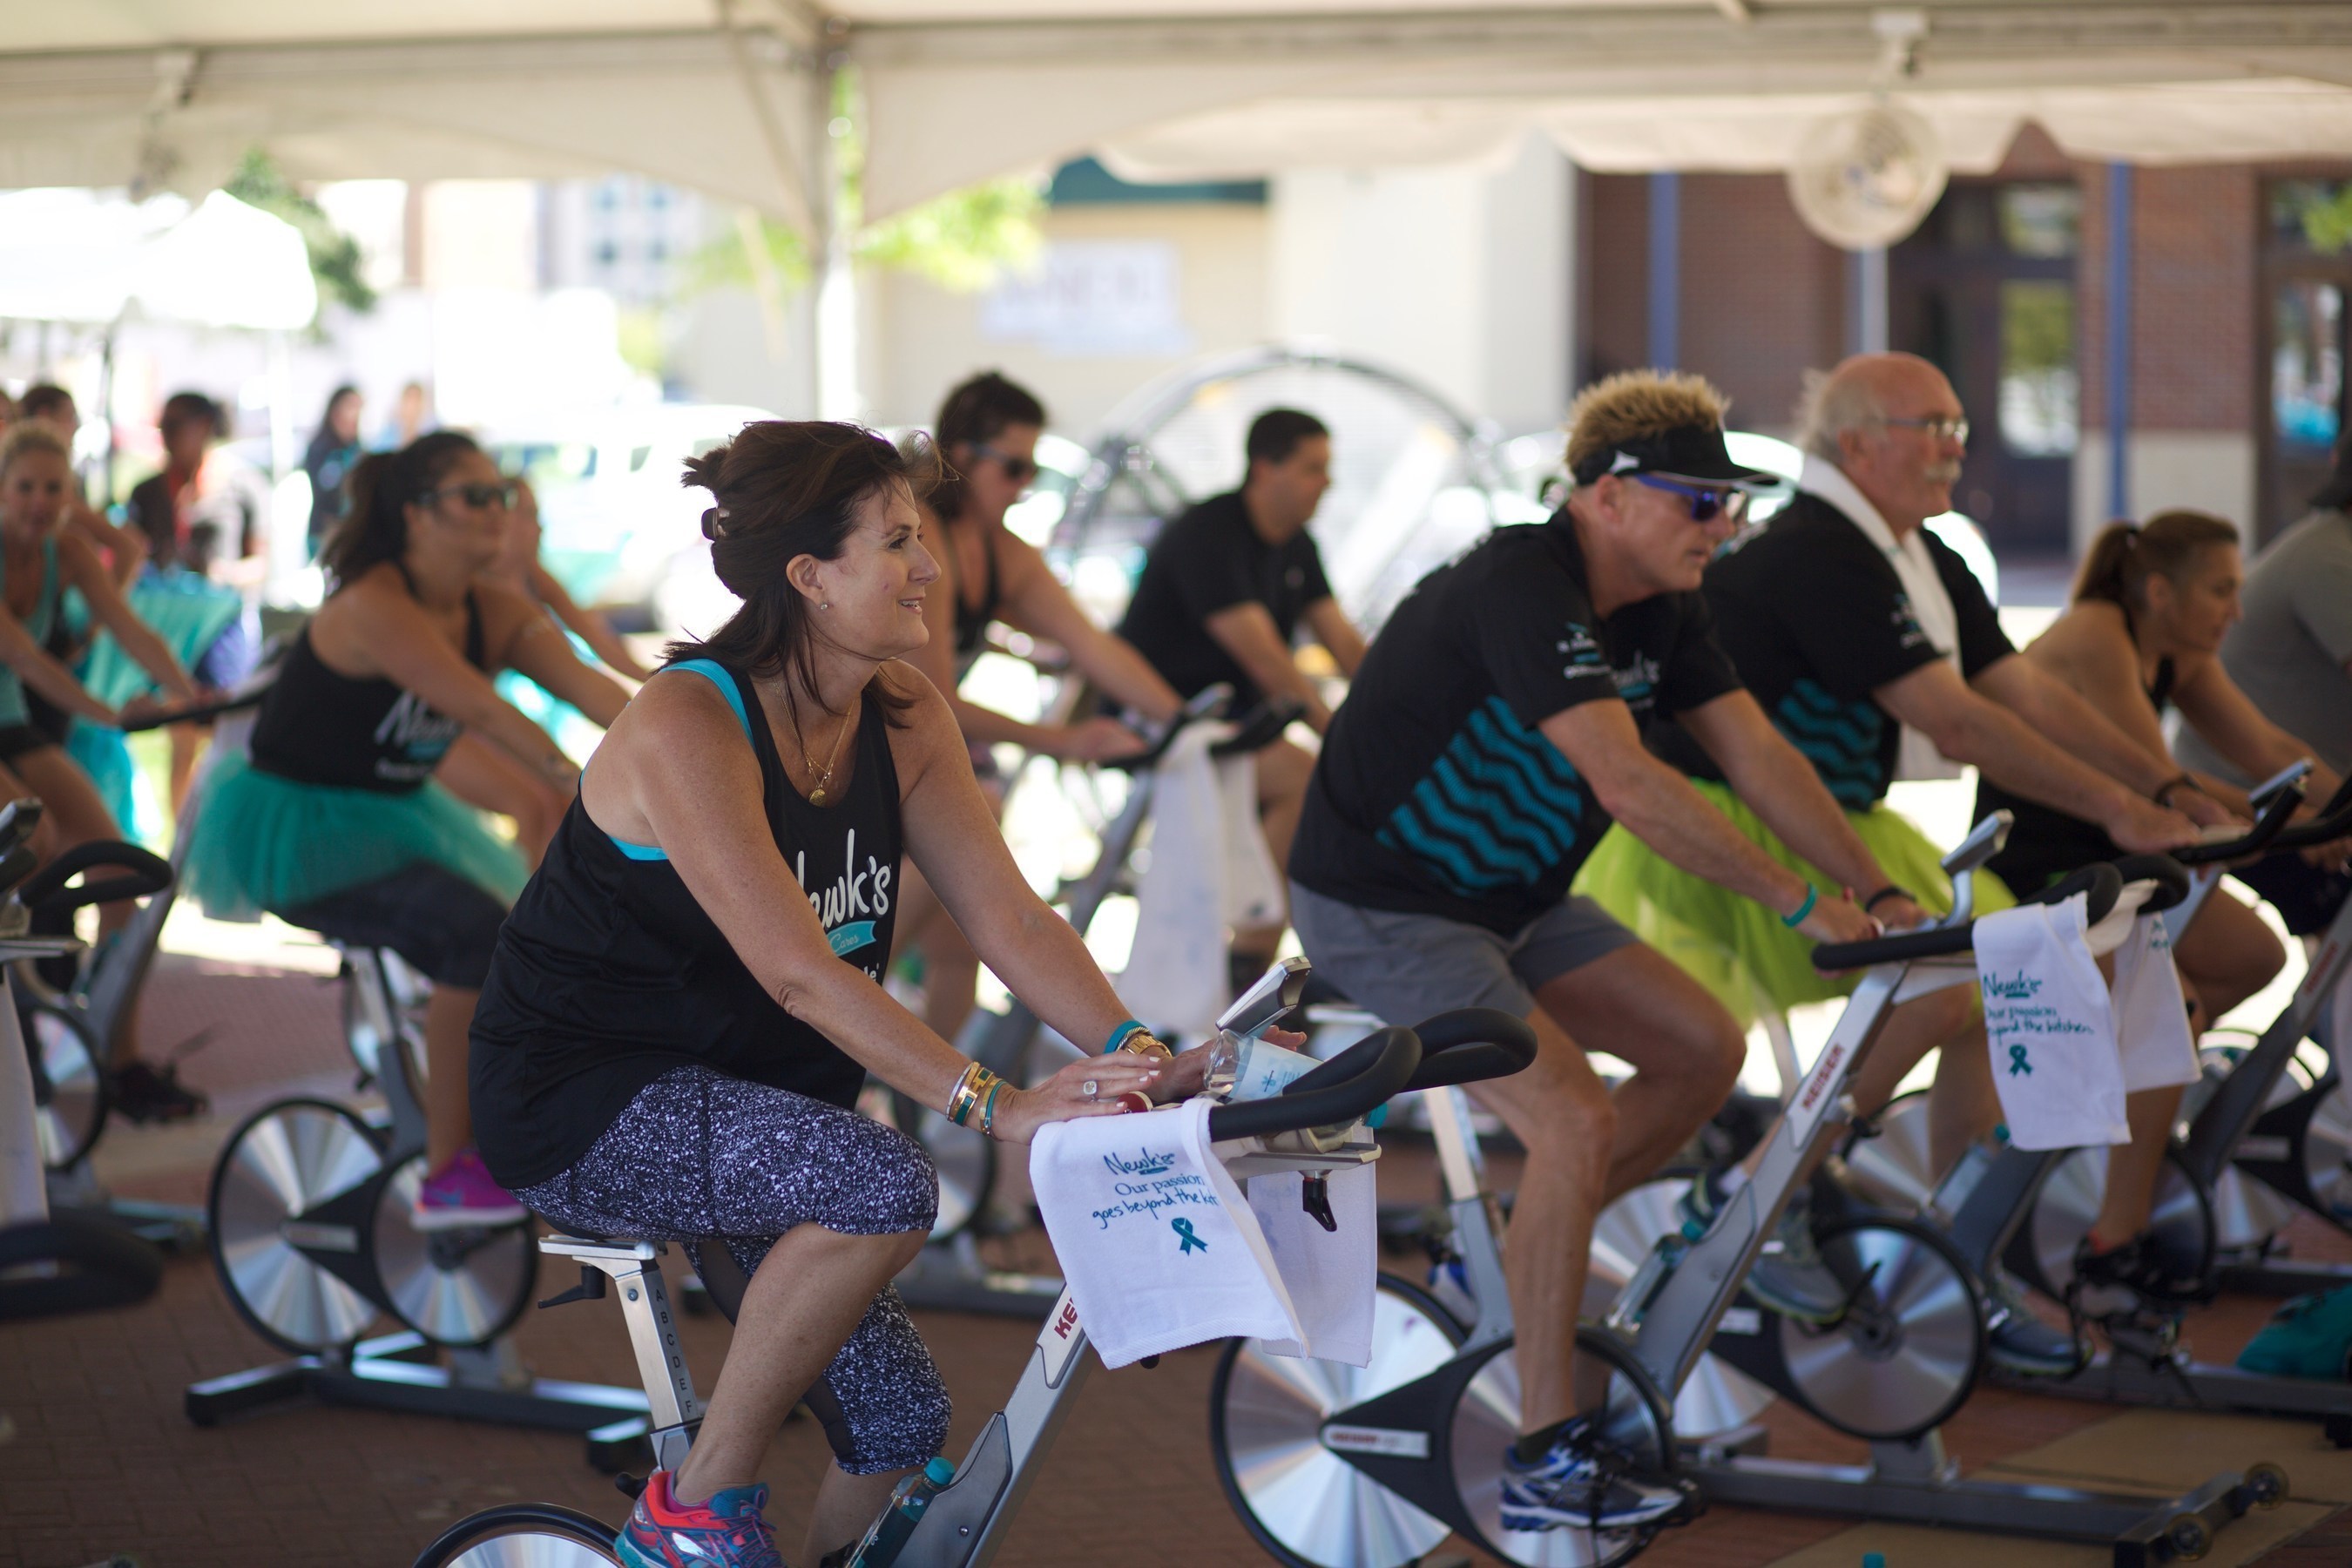 Newk's Cares Co-Founder Lori Newcomb joins riders in pedaling toward a cure at the third annual Ovarian Cycle(R) Jackson spin celebration.